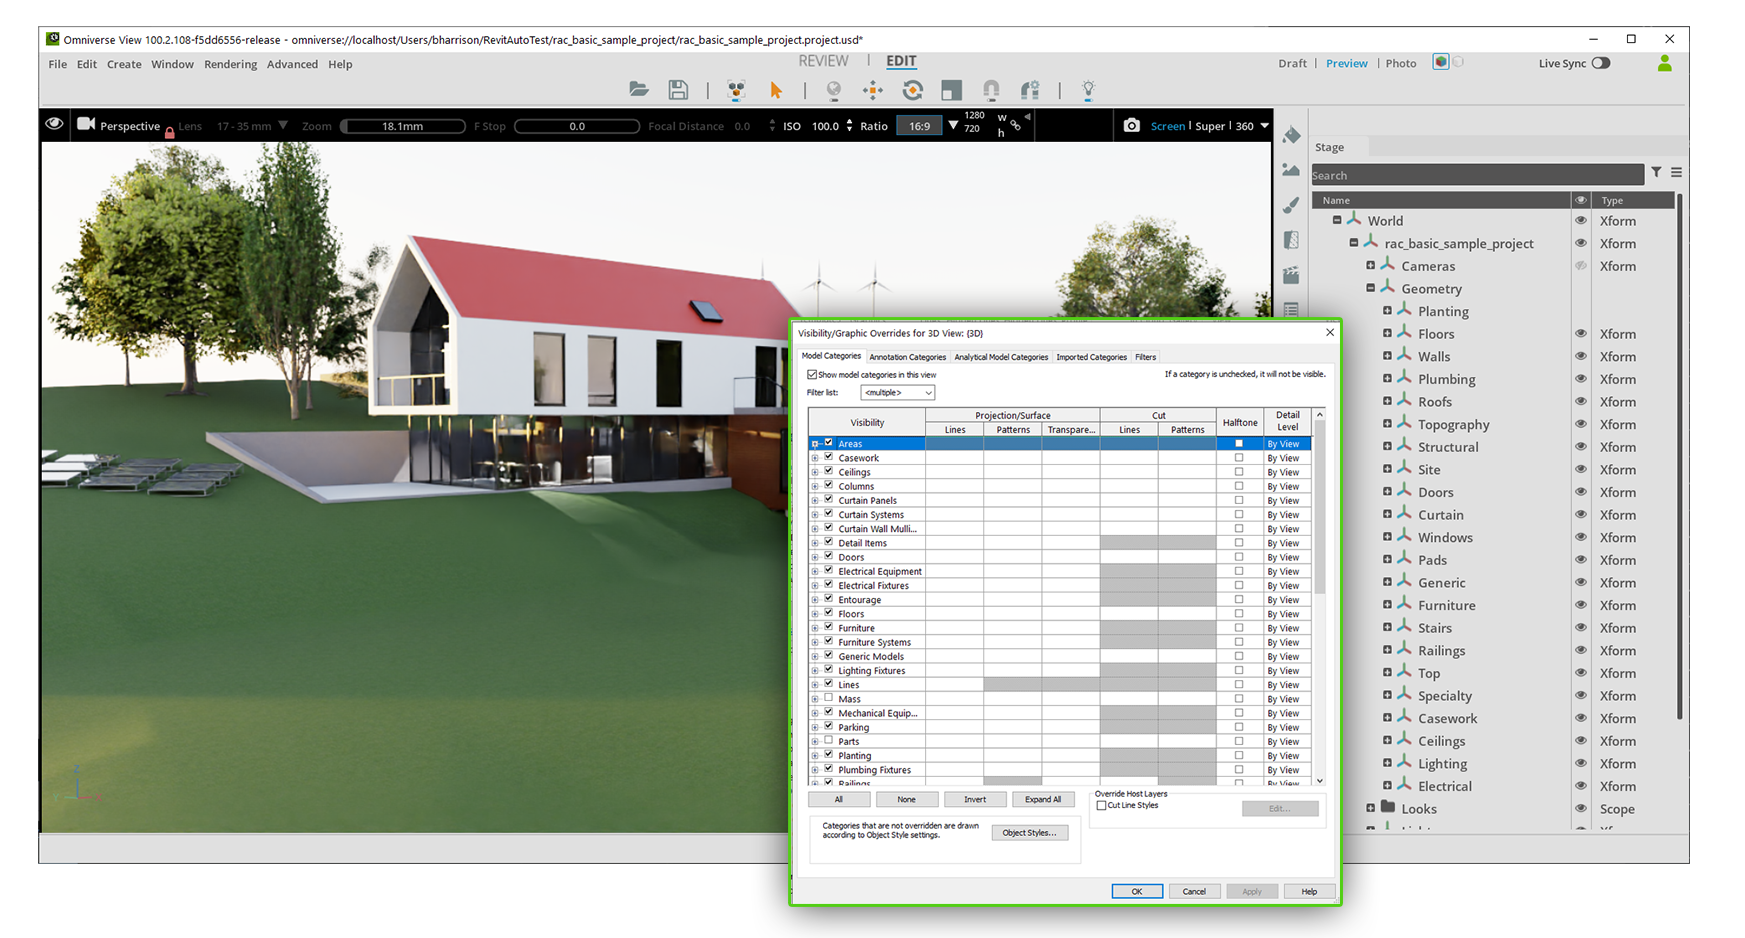 ../../_images/revit_matching-view-categories.png